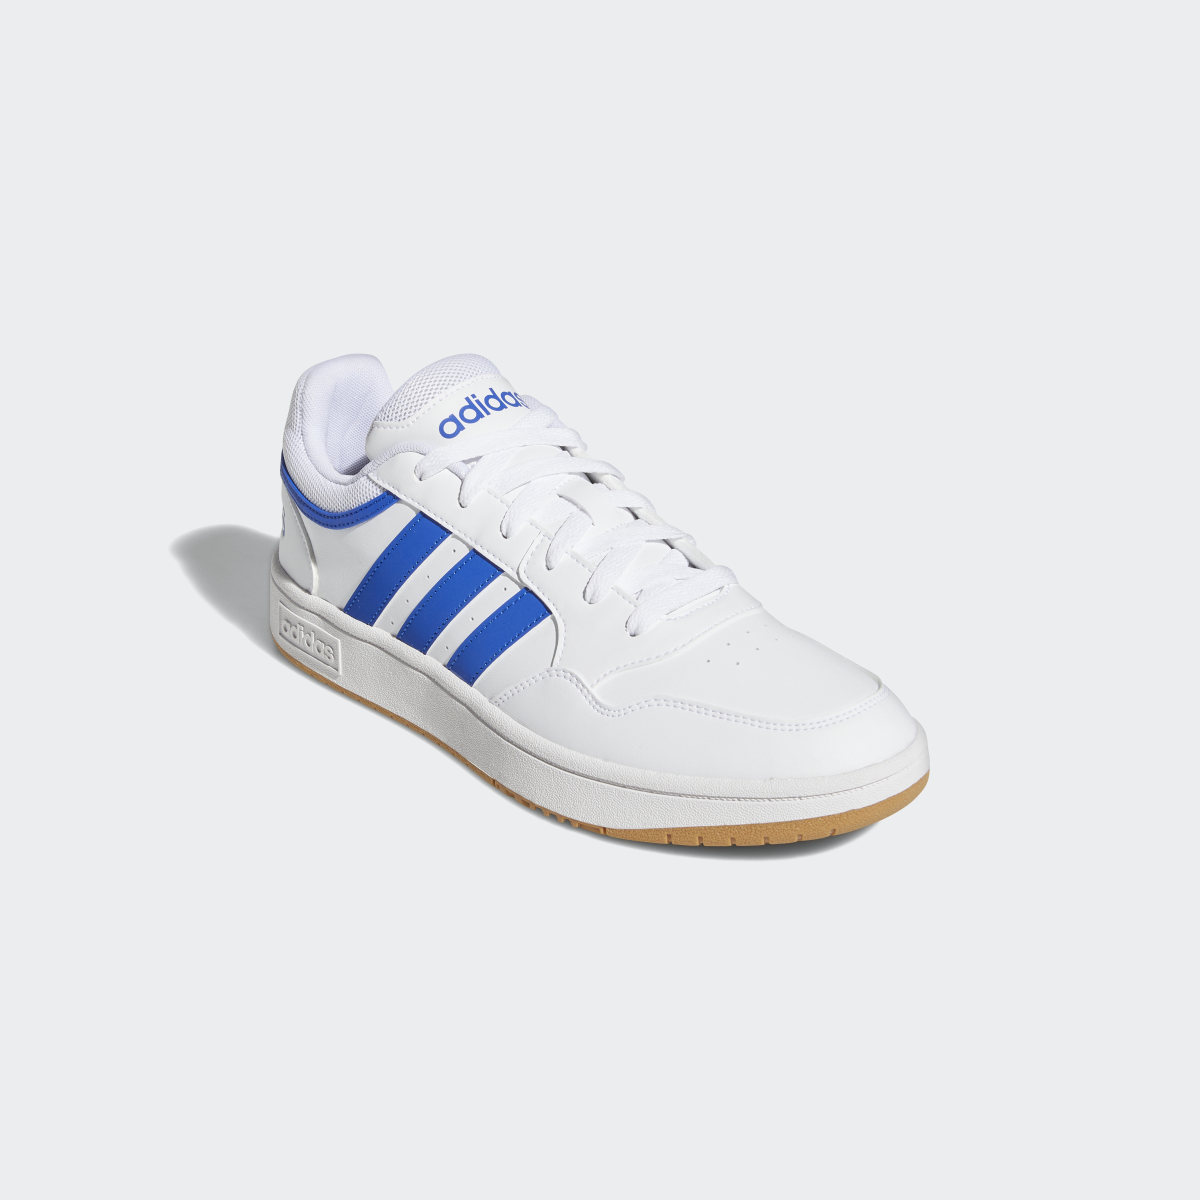 Adidas Hoops 3.0 Low Classic Vintage Schuh. 5